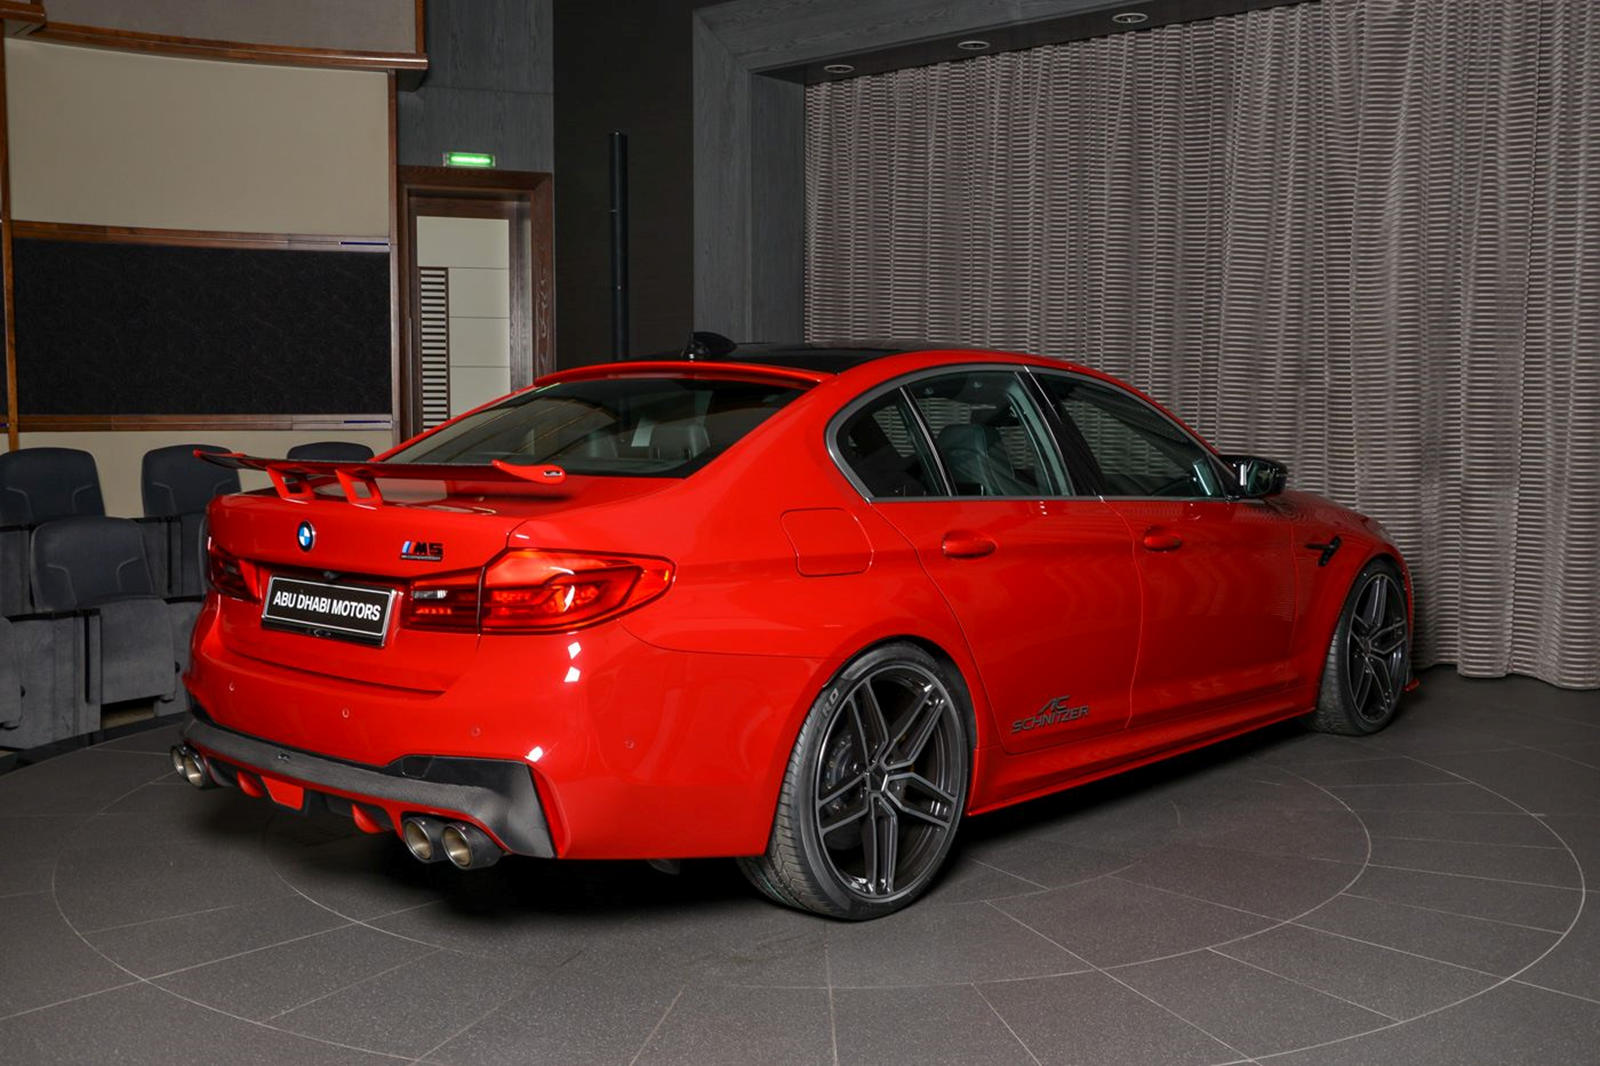 Бмв ф90 тюнинг. BMW m5 Competition Red. BMW m5 Competition красная. BMW m5 f90 Red. BMW m5 f90 Competition.